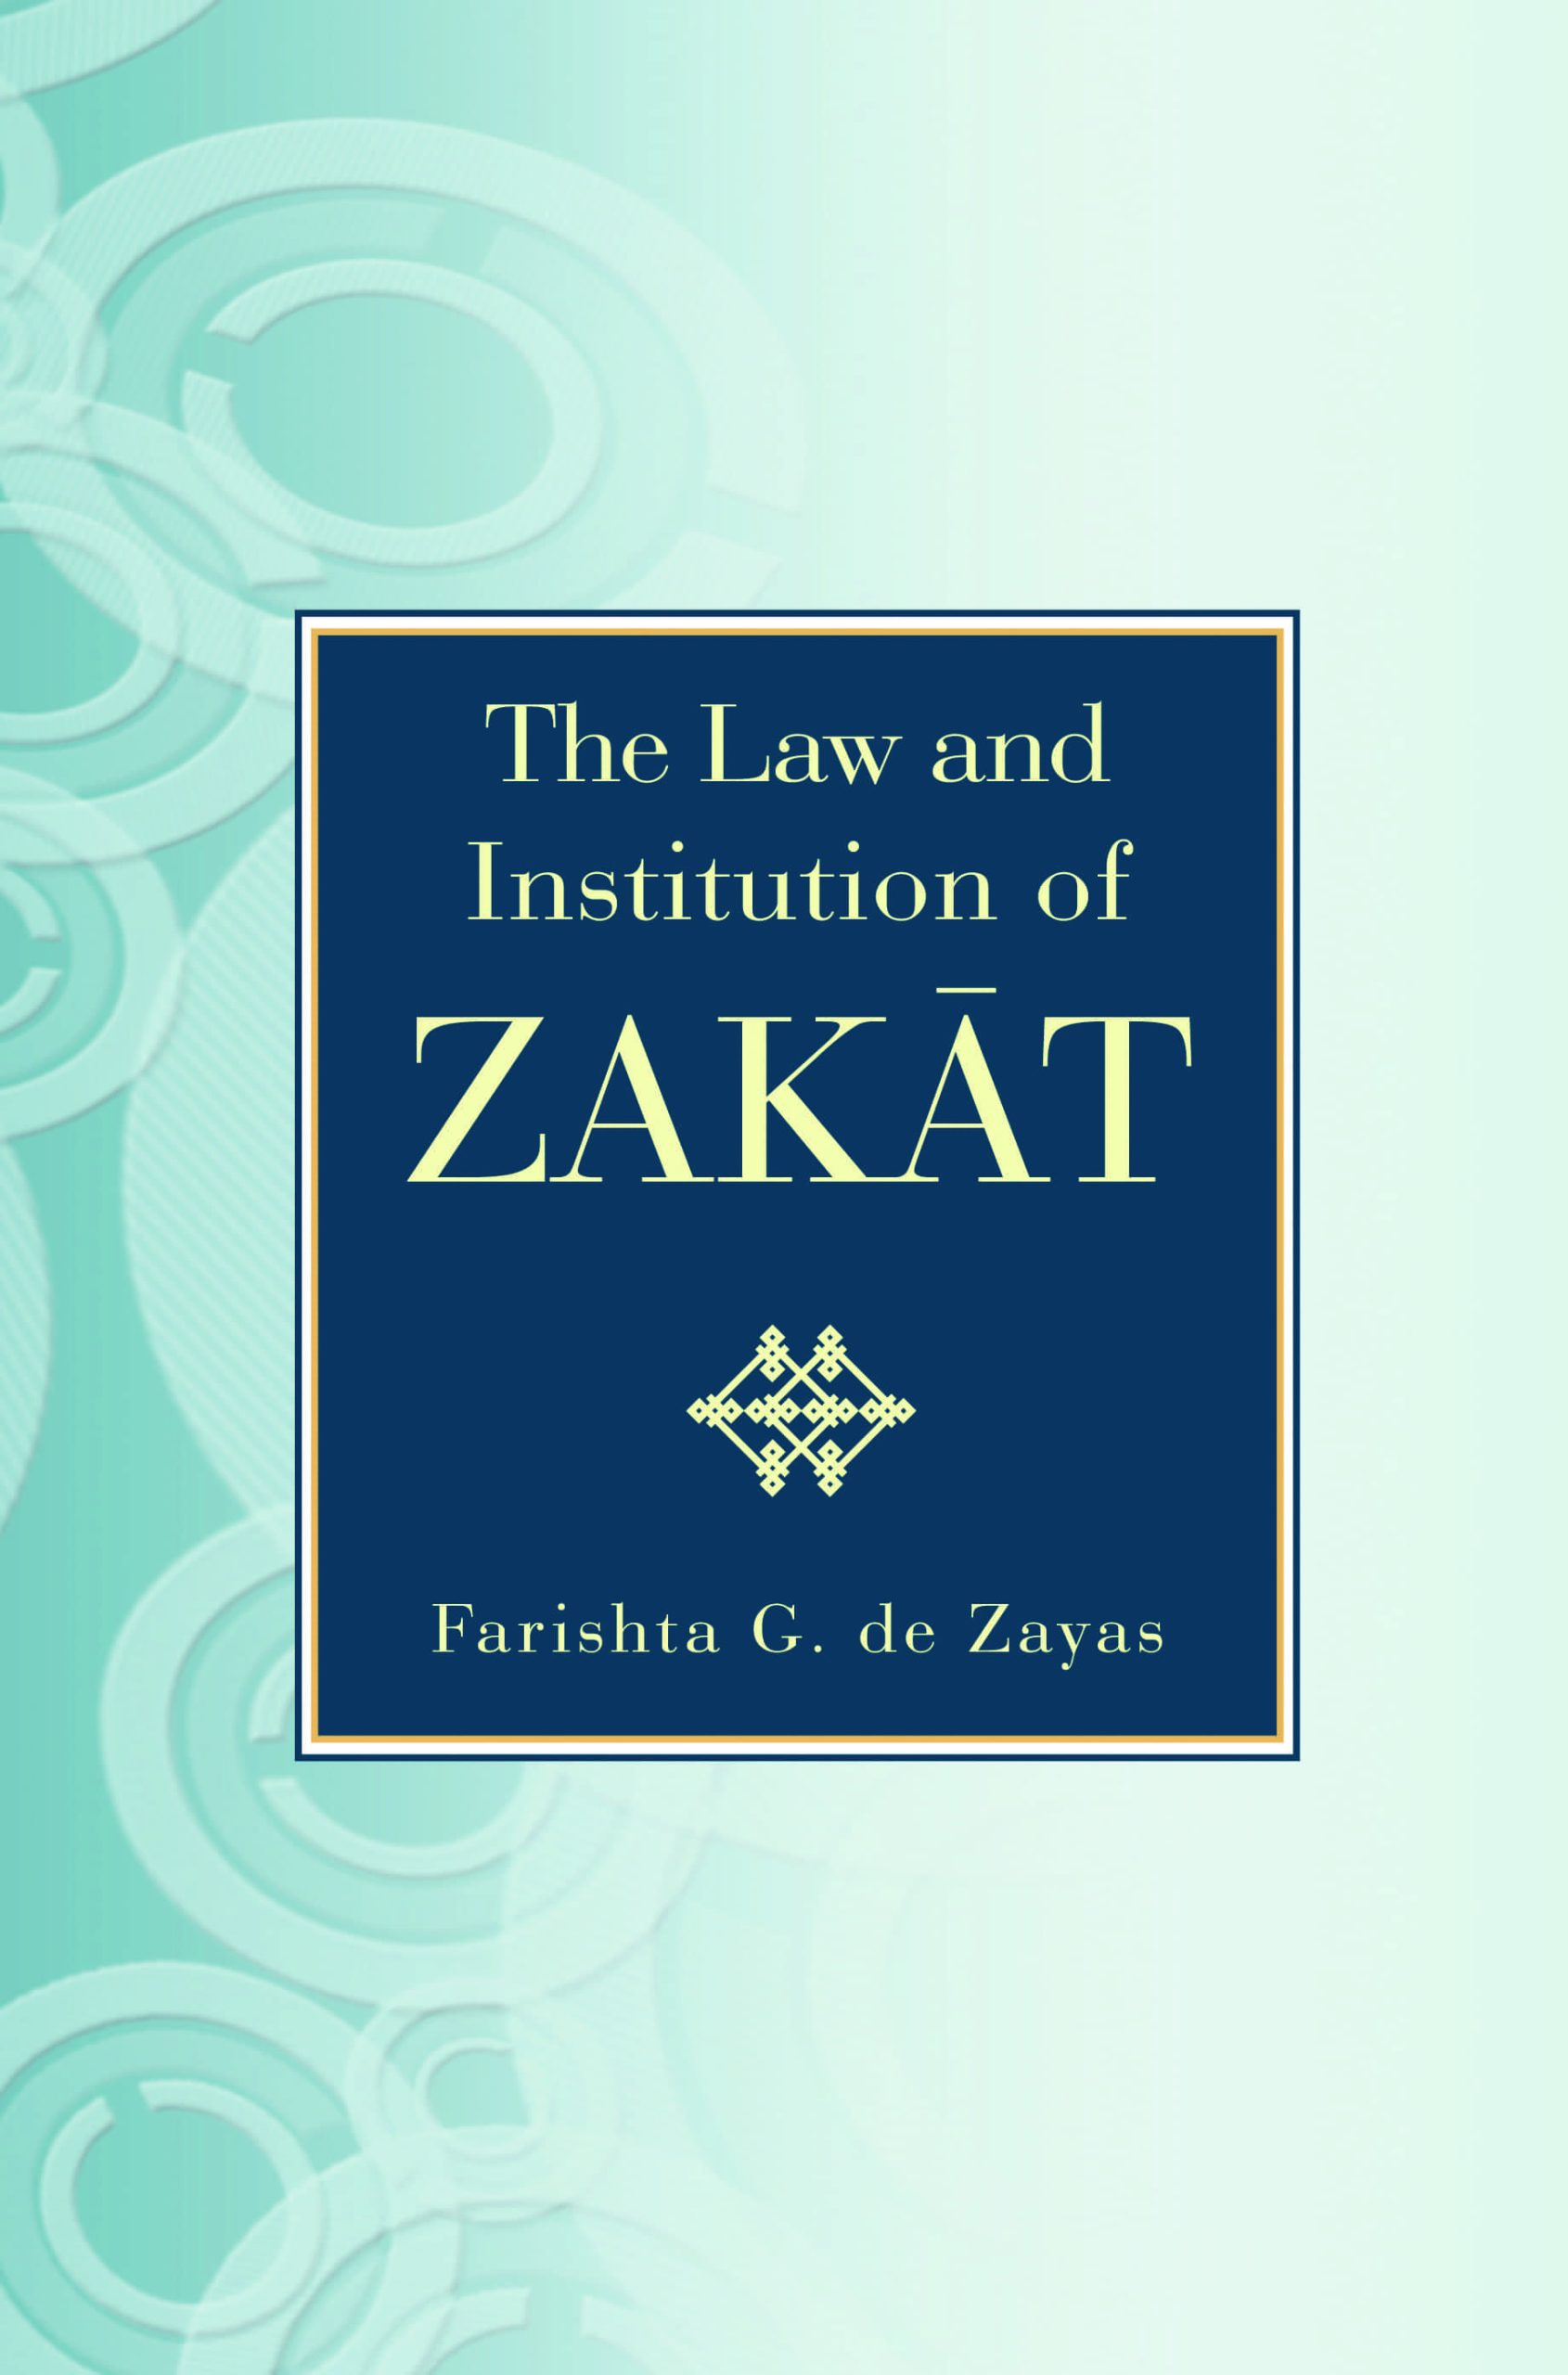 The Law and Institution of Zakat